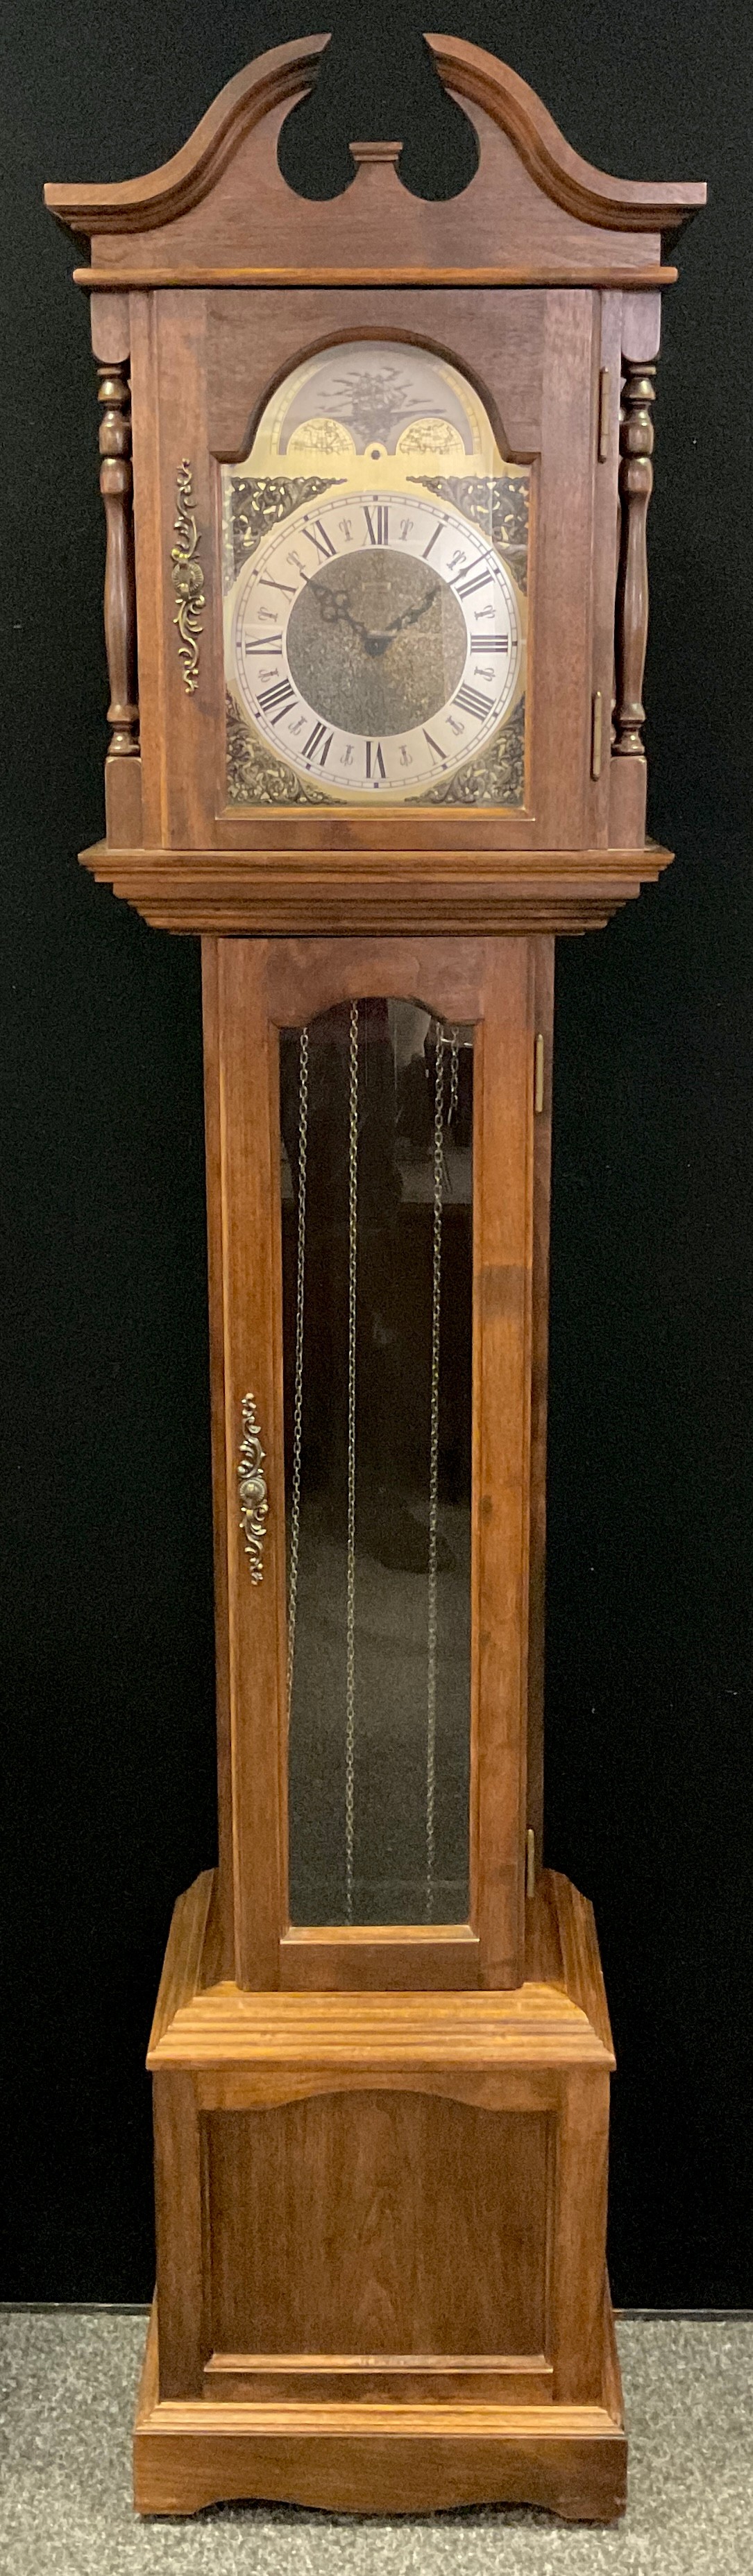 A Long case clock, by Emperor Clock Company, Germany, walnut stained hardwood case, swan-neck